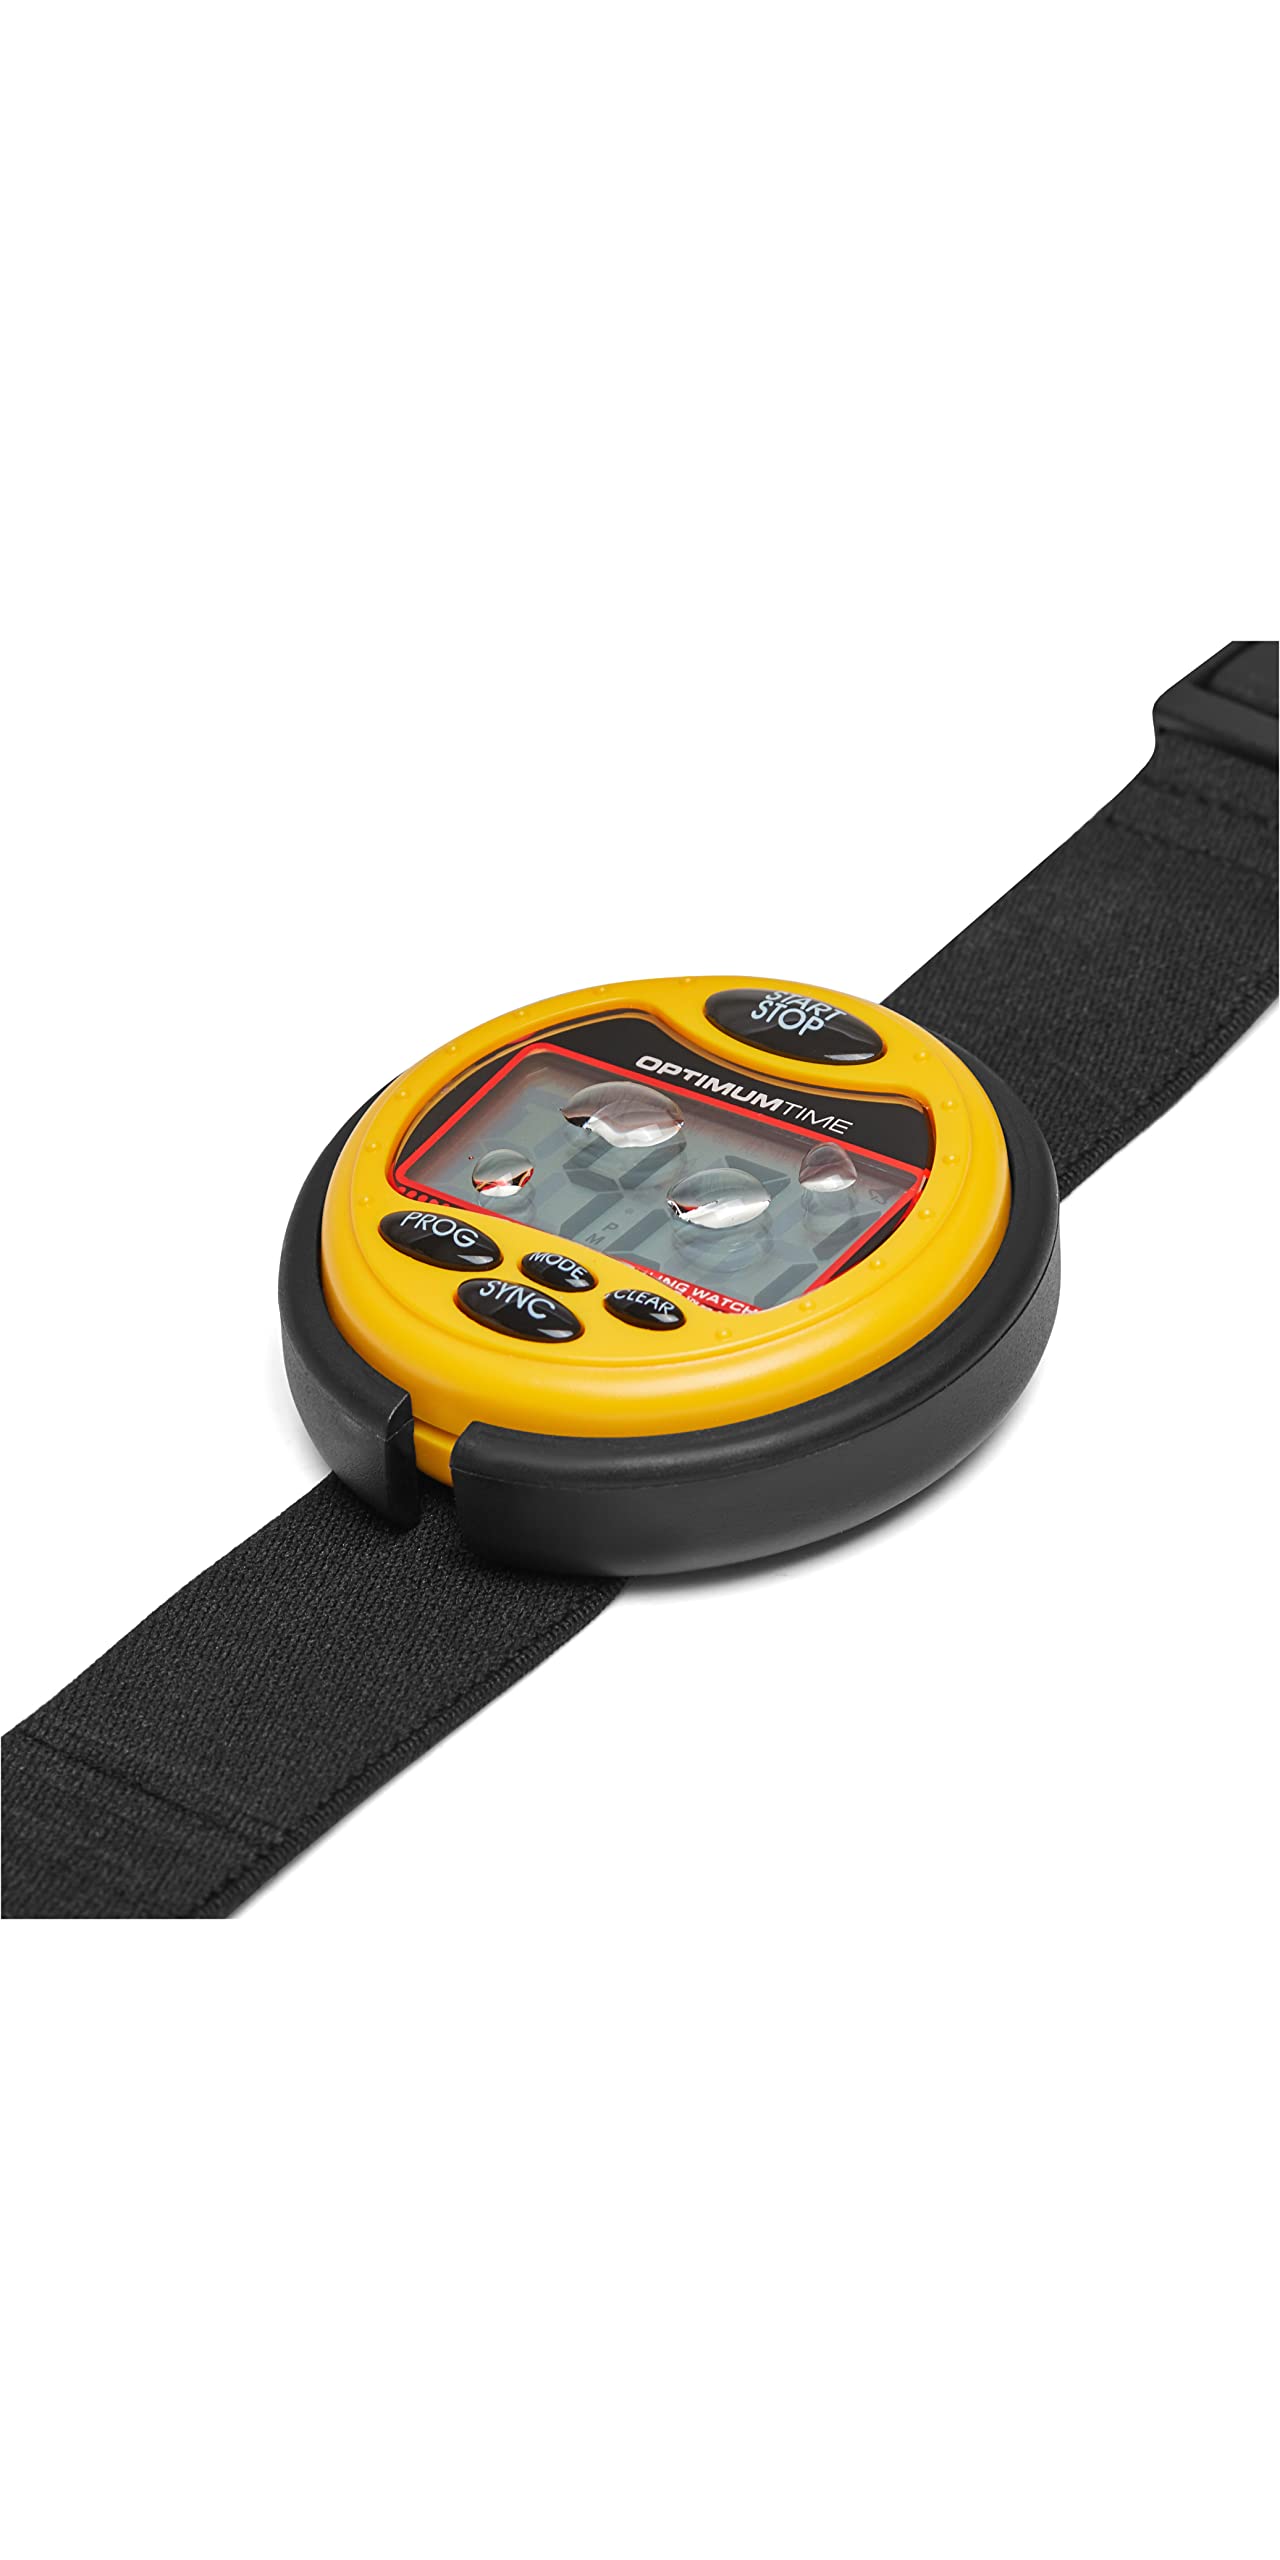 Optimum Time Series 3 Sailing Watch in Yellow - Water Resistant Race Timer for Sailing